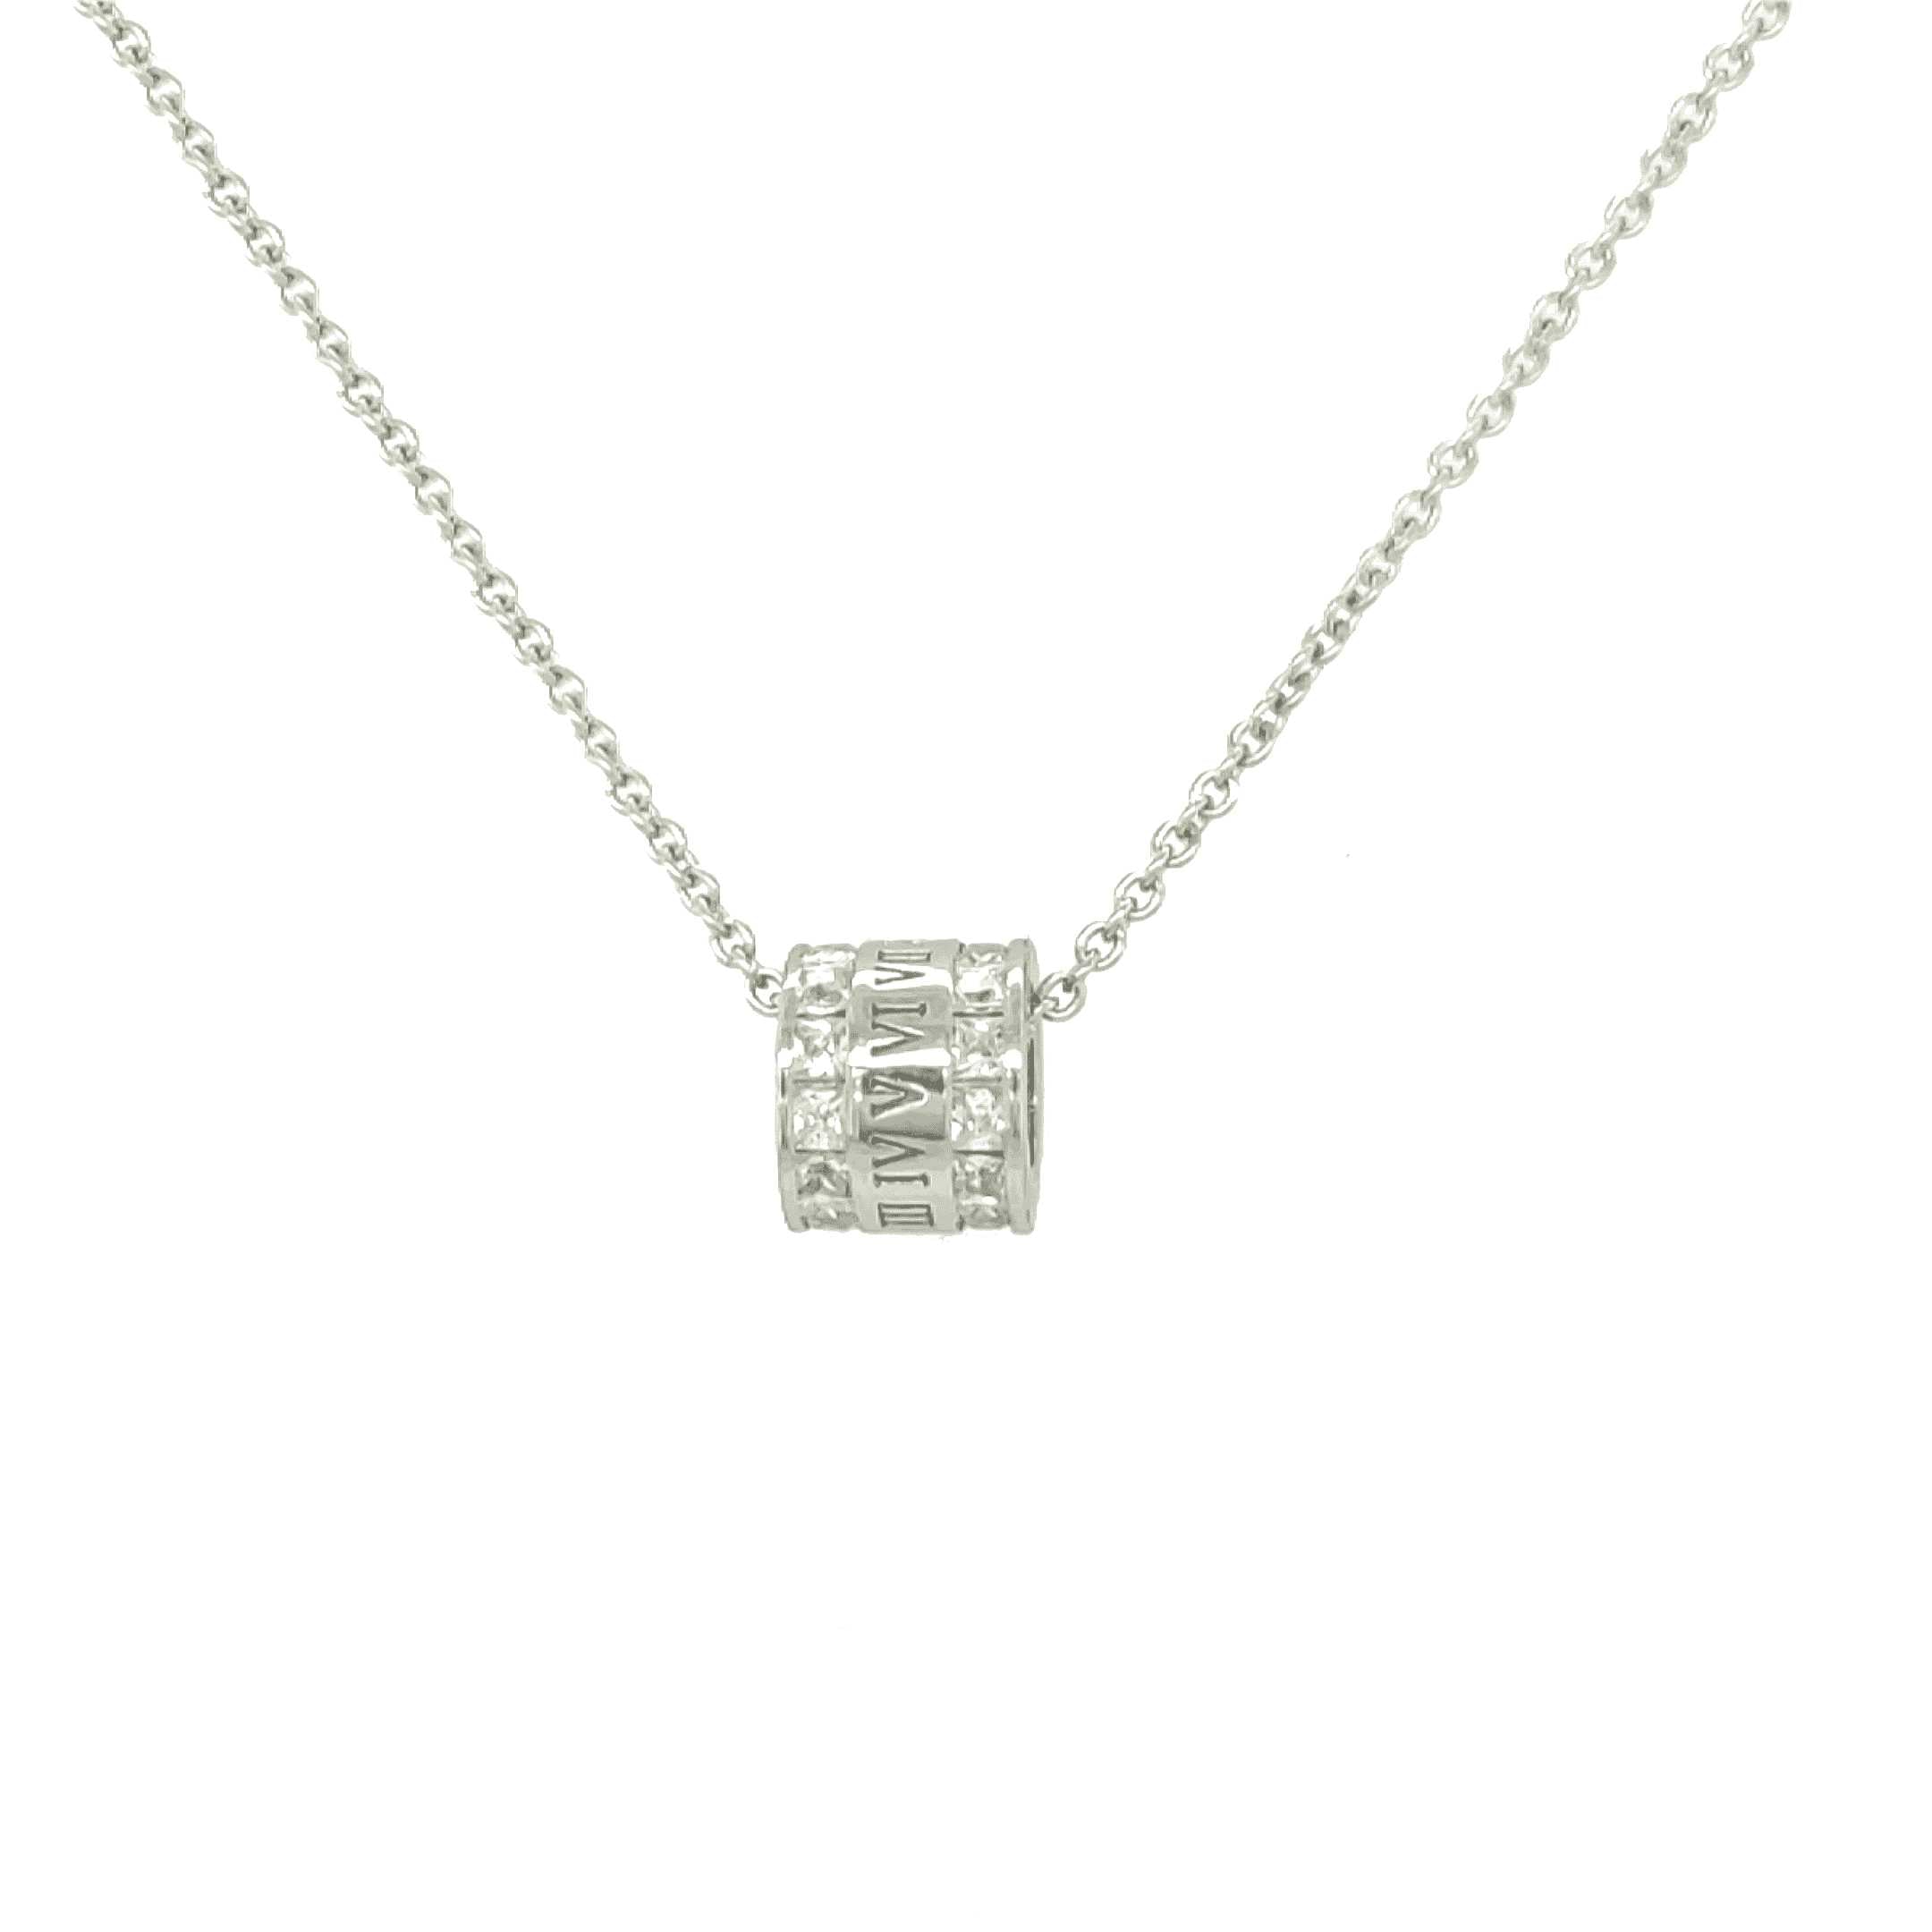 Asfour rounded Zircon Stone Silver 925 Necklace - NR0061